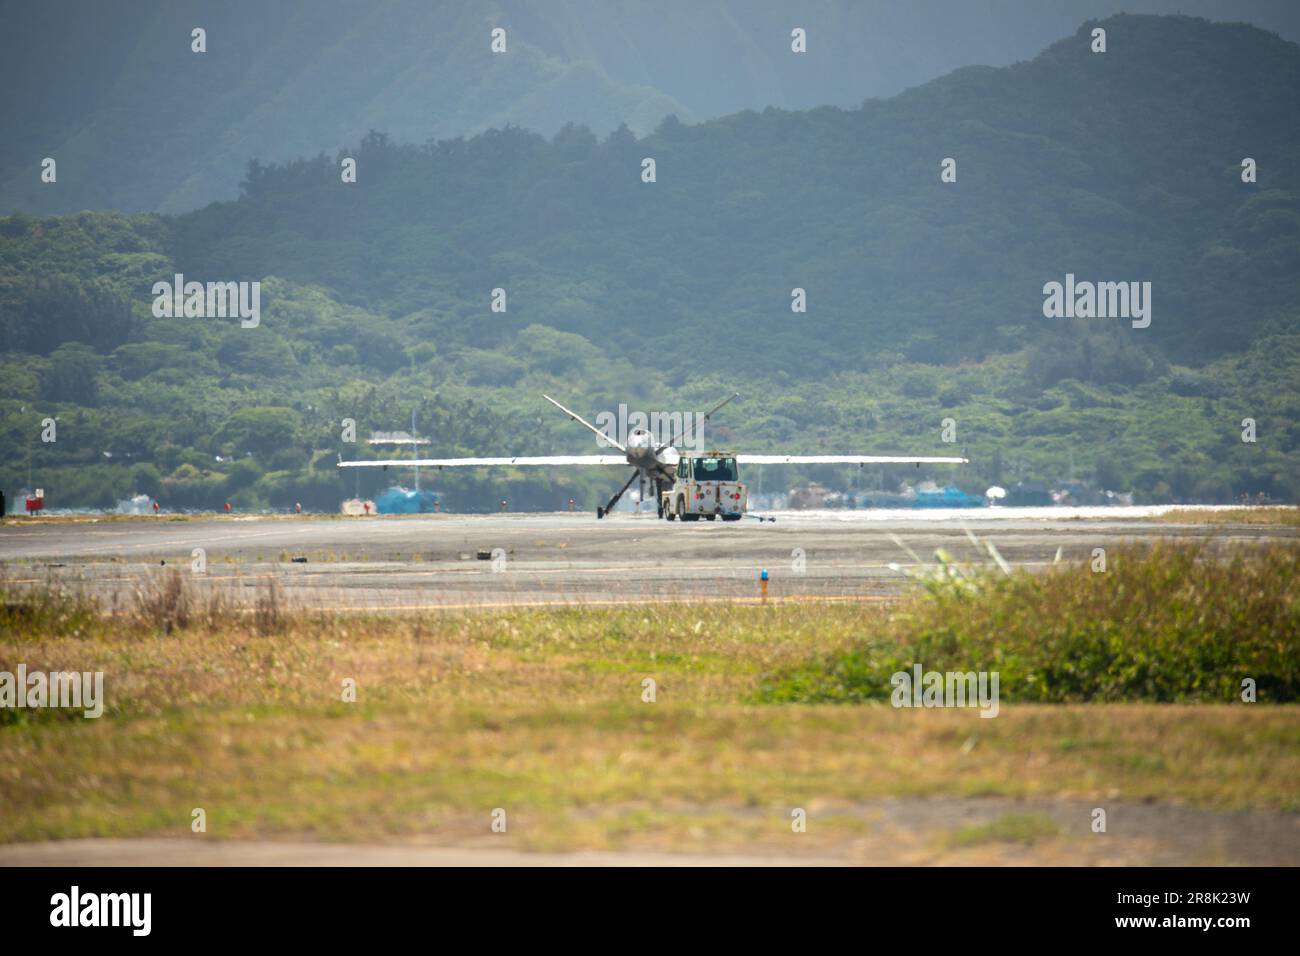 U.S. Marine Corps Marine Unmanned Aerial Vehicle Squadron (VMU) 3, Marine Aircraft Group 24, maneuvers an MQ-9A down the flight line on Marine Corps Air Station Kaneohe Bay, June 20, 2023. The MQ-9A is a remotely piloted aircraft capable of supporting a wide range of operations such as coastal and border surveillance, weapons tracking, embargo enforcement, humanitarian and disaster assistance, support of peacekeeping and counter-narcotic operations. VMU-3 supports the Marine Air-Ground Task Force by providing multi-surveillance and reconnaissance, data gateway and relay capabilities through an Stock Photo